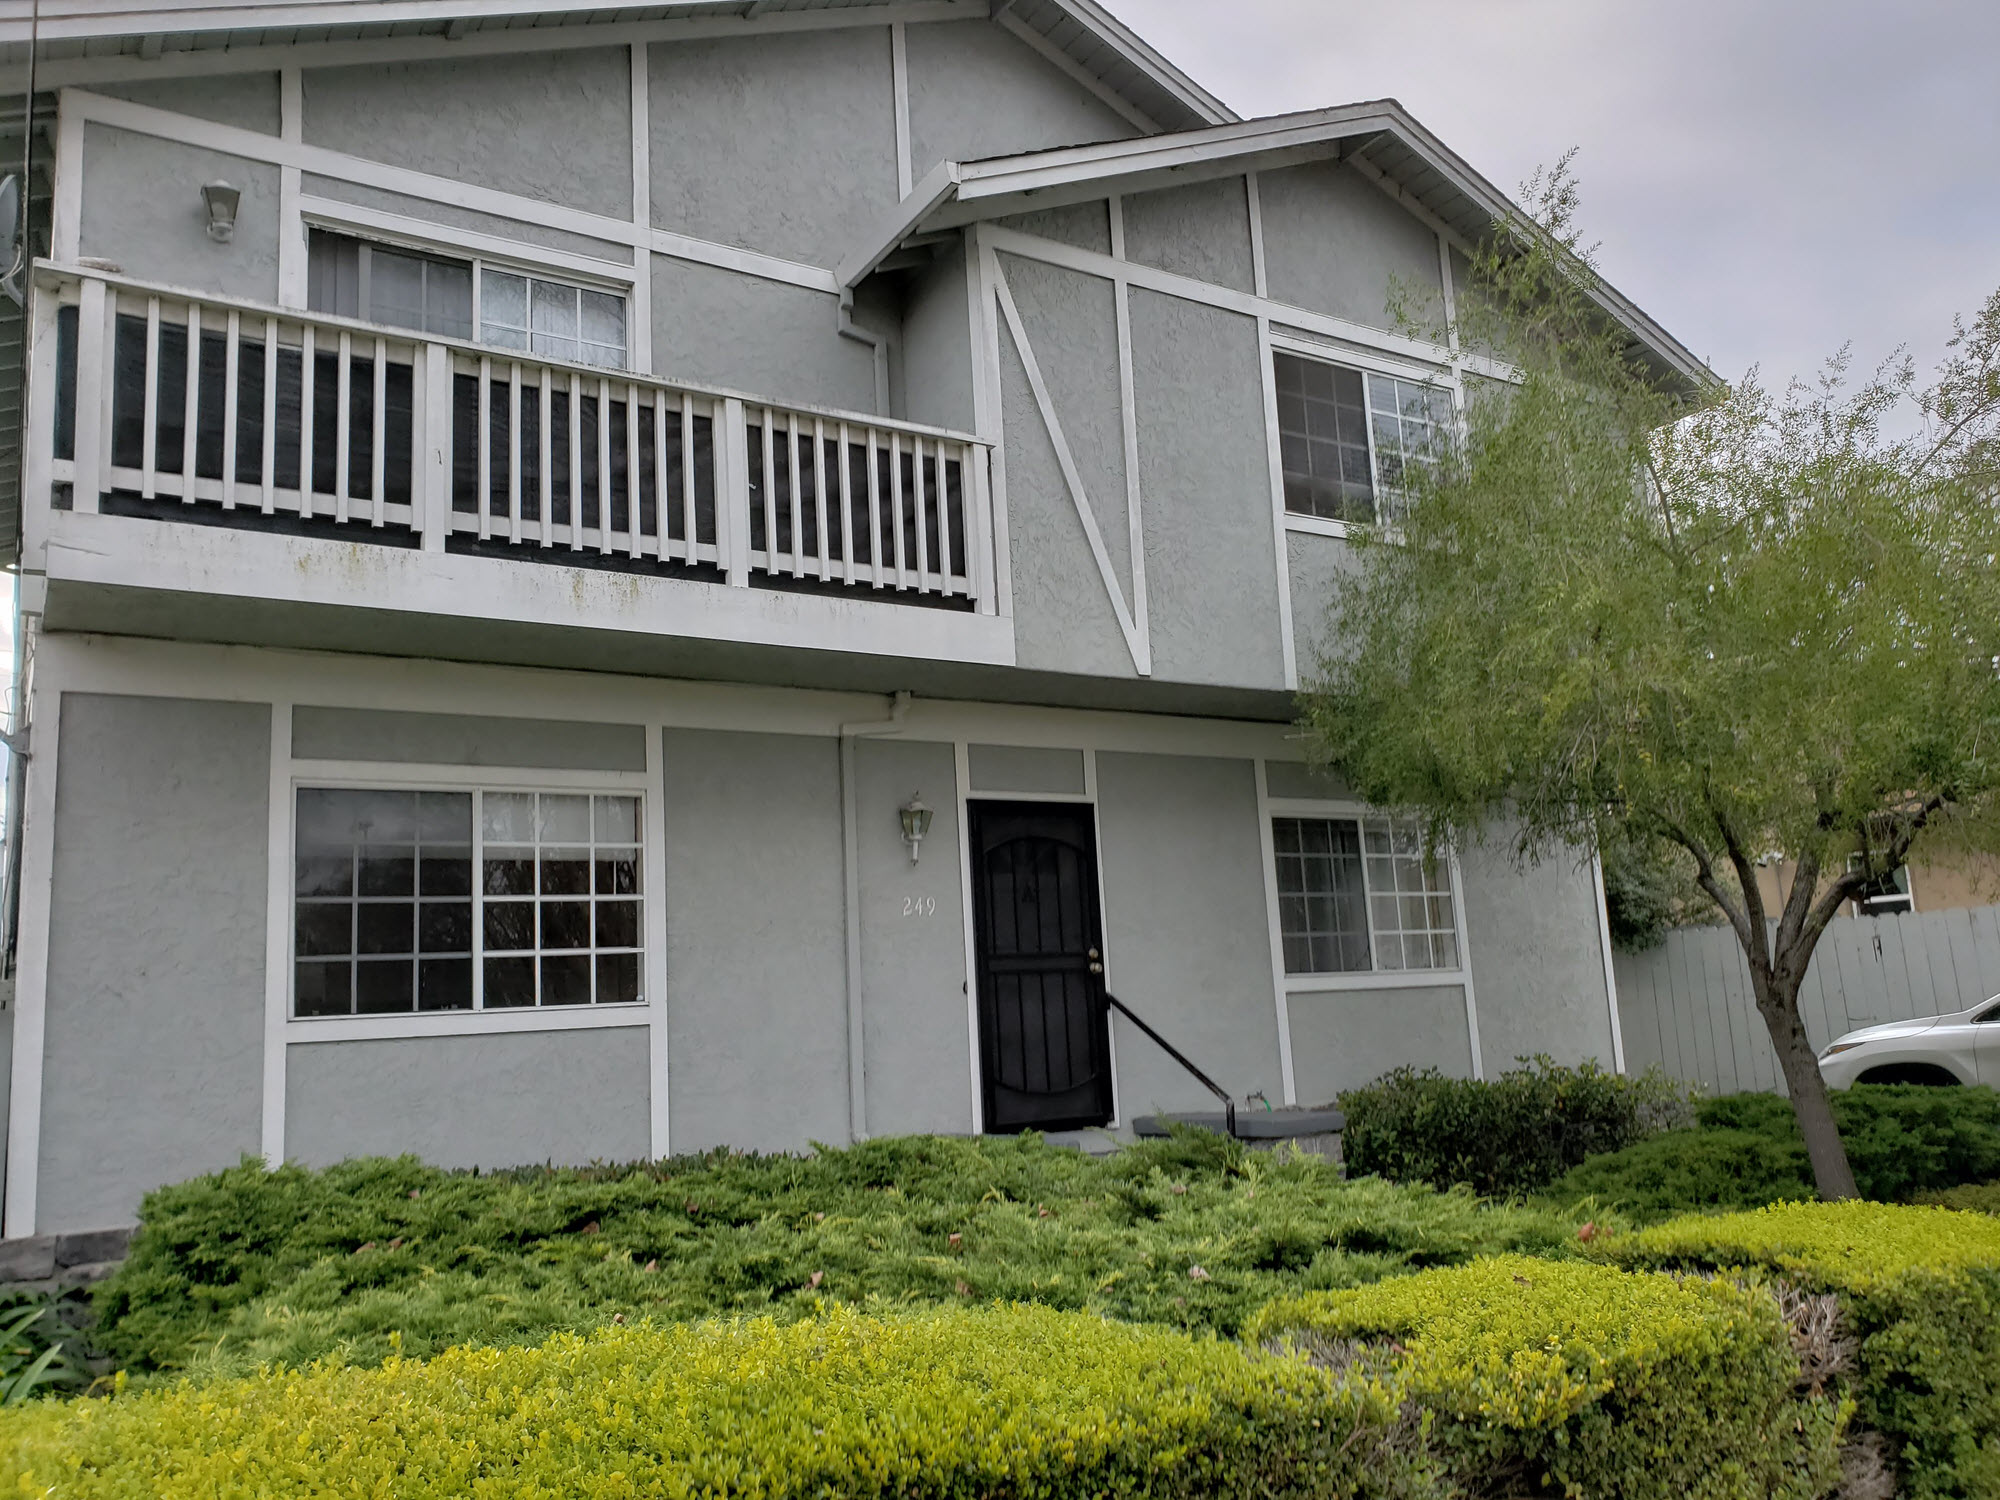 The Eldorado Coed Sober Living Homes for Males and Females in San Mateo, CA